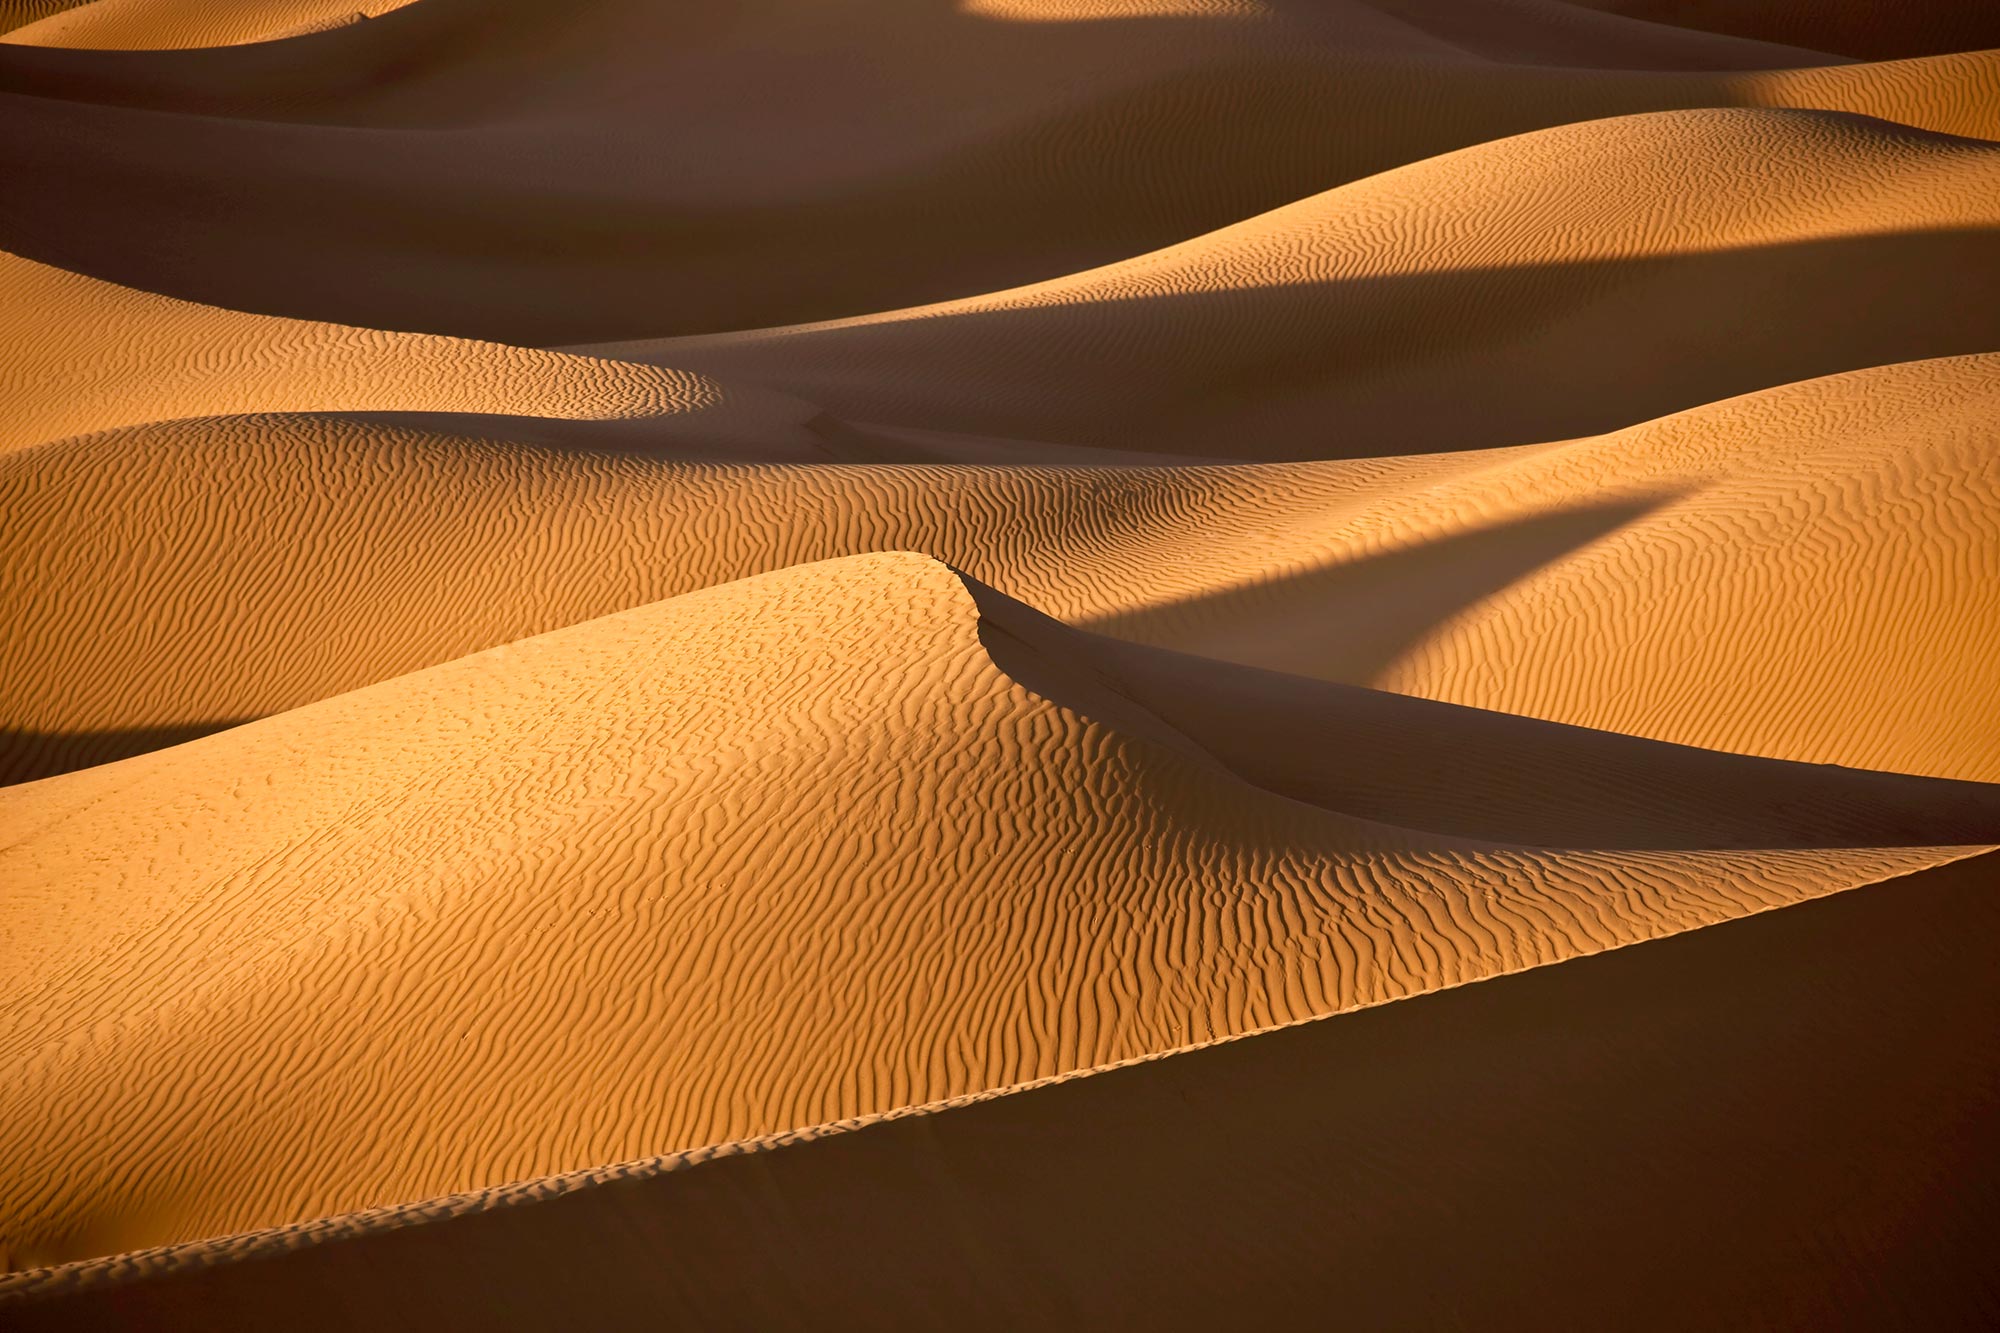 Physics Researchers Discover Sand Dunes Can ‘Communicate’ With Each Other